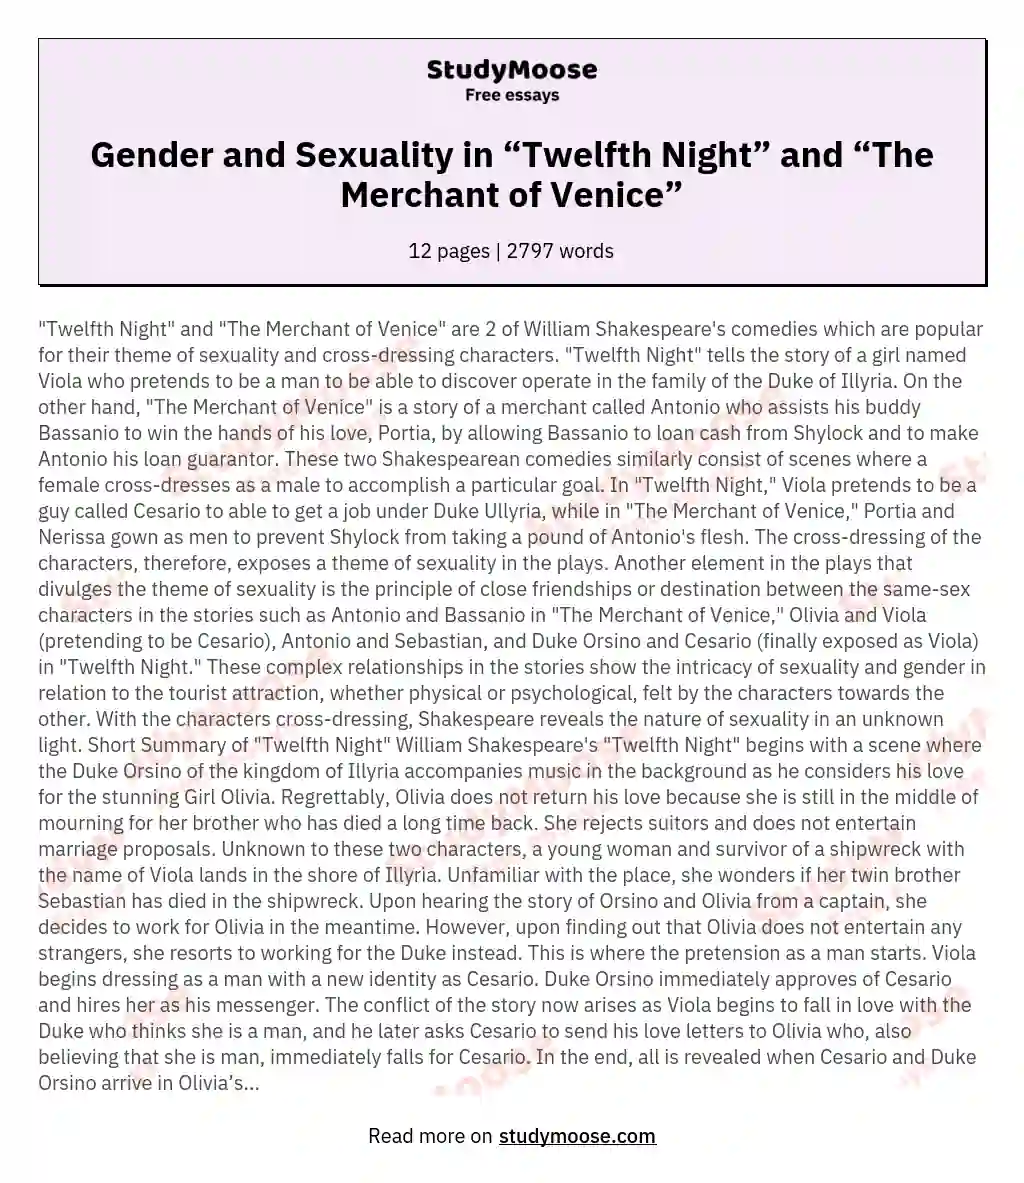 Gender and Sexuality in “Twelfth Night” and “The Merchant of Venice”